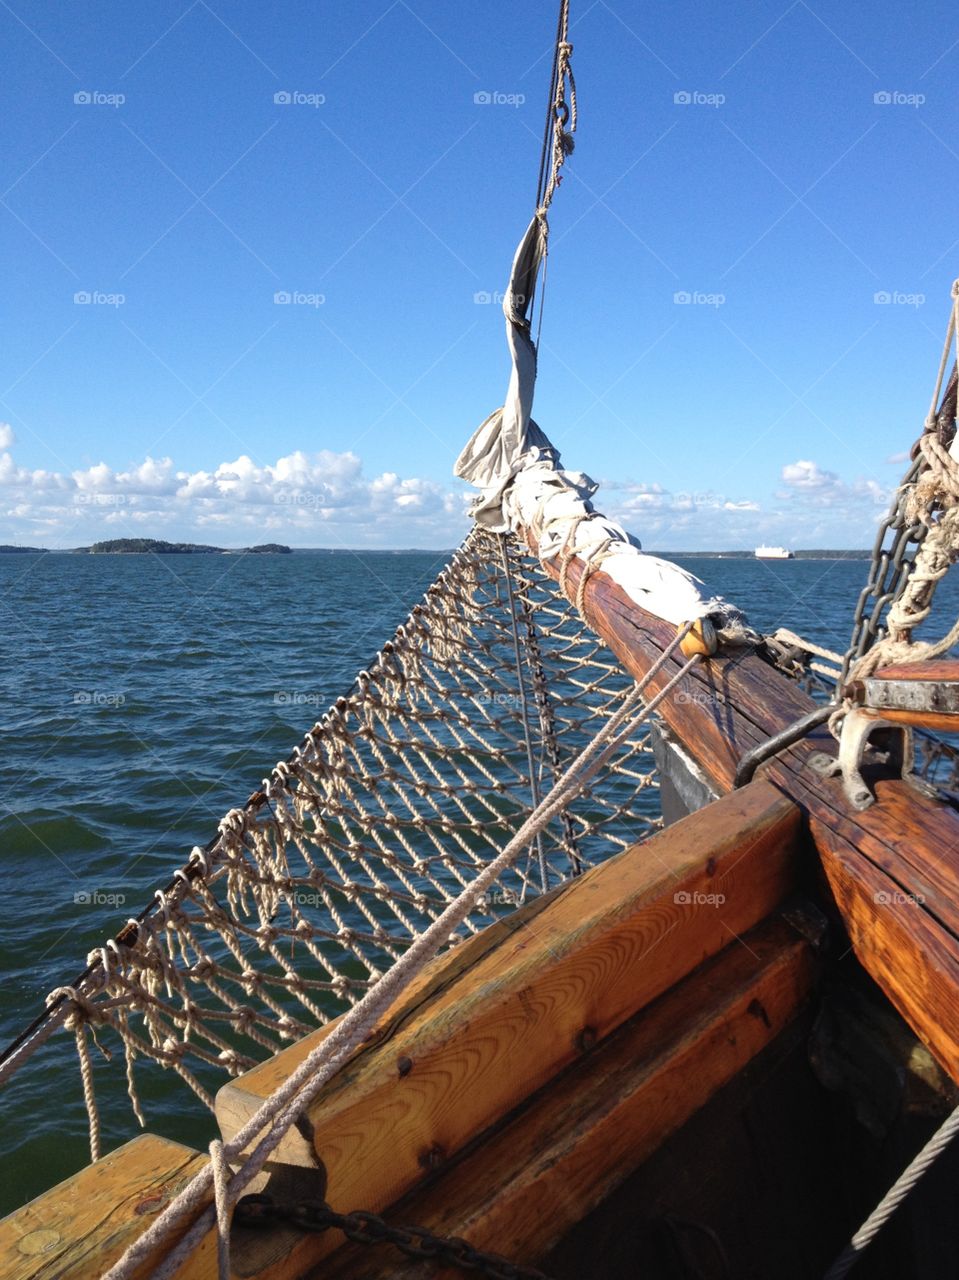 Towards the horison. Sail ship's bowsprit and the lake